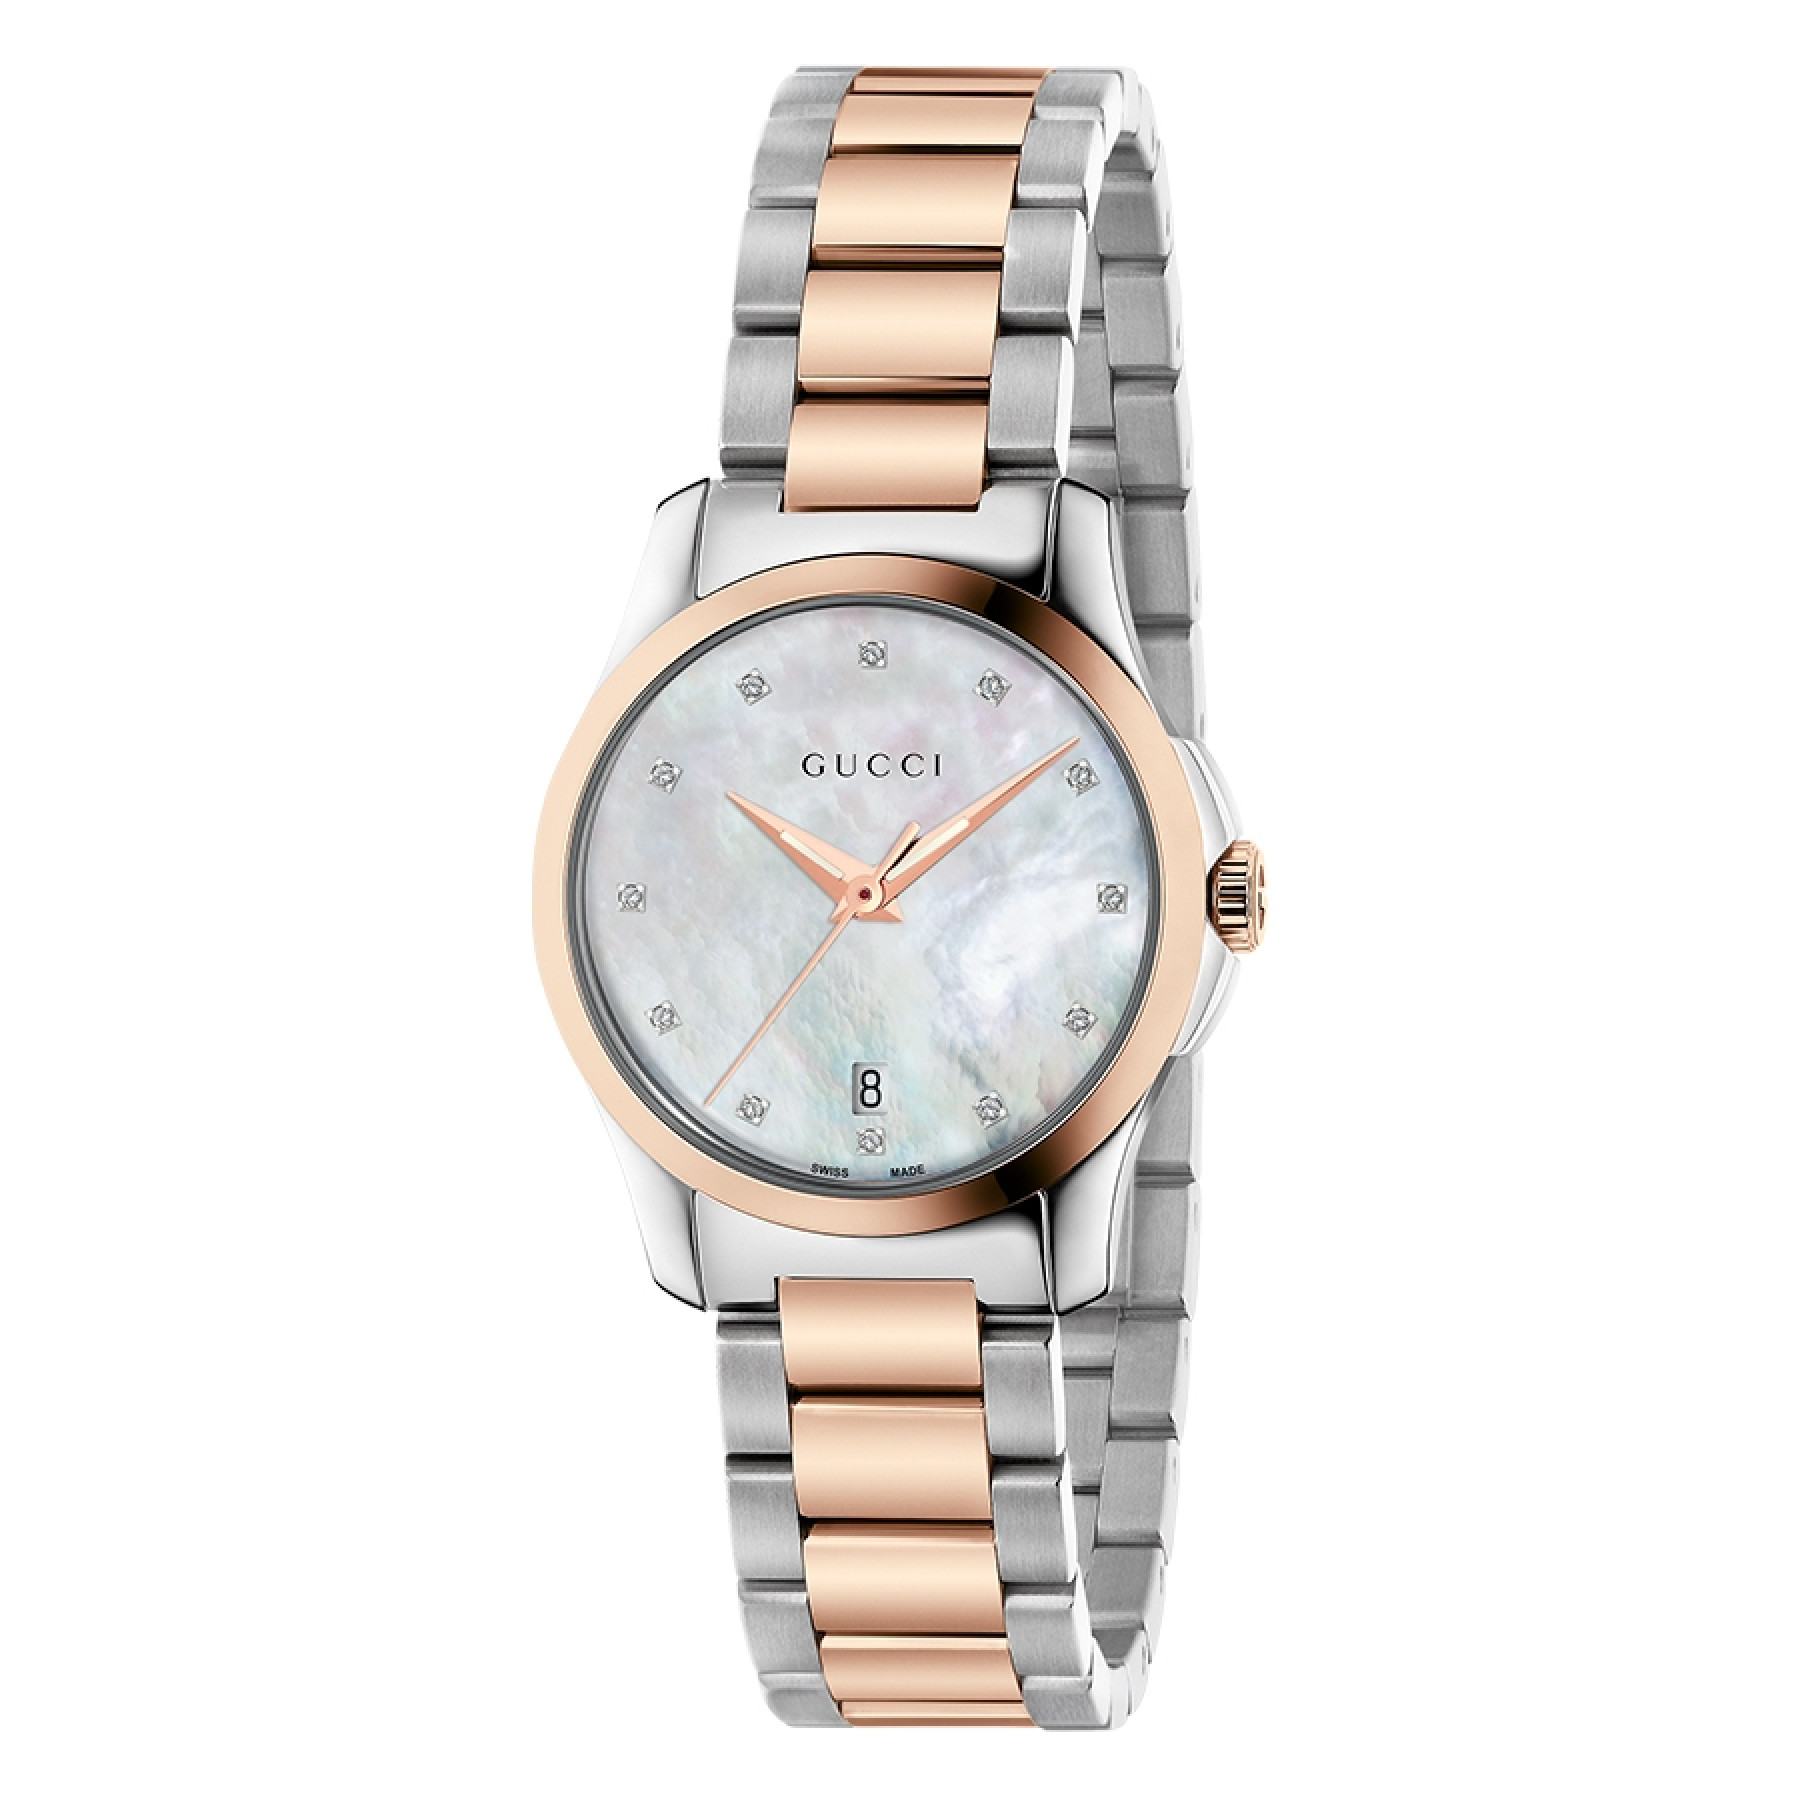 Gucci G-Timeless Two-Tone 27mm Mother of Pearl Diamond Dial Watch